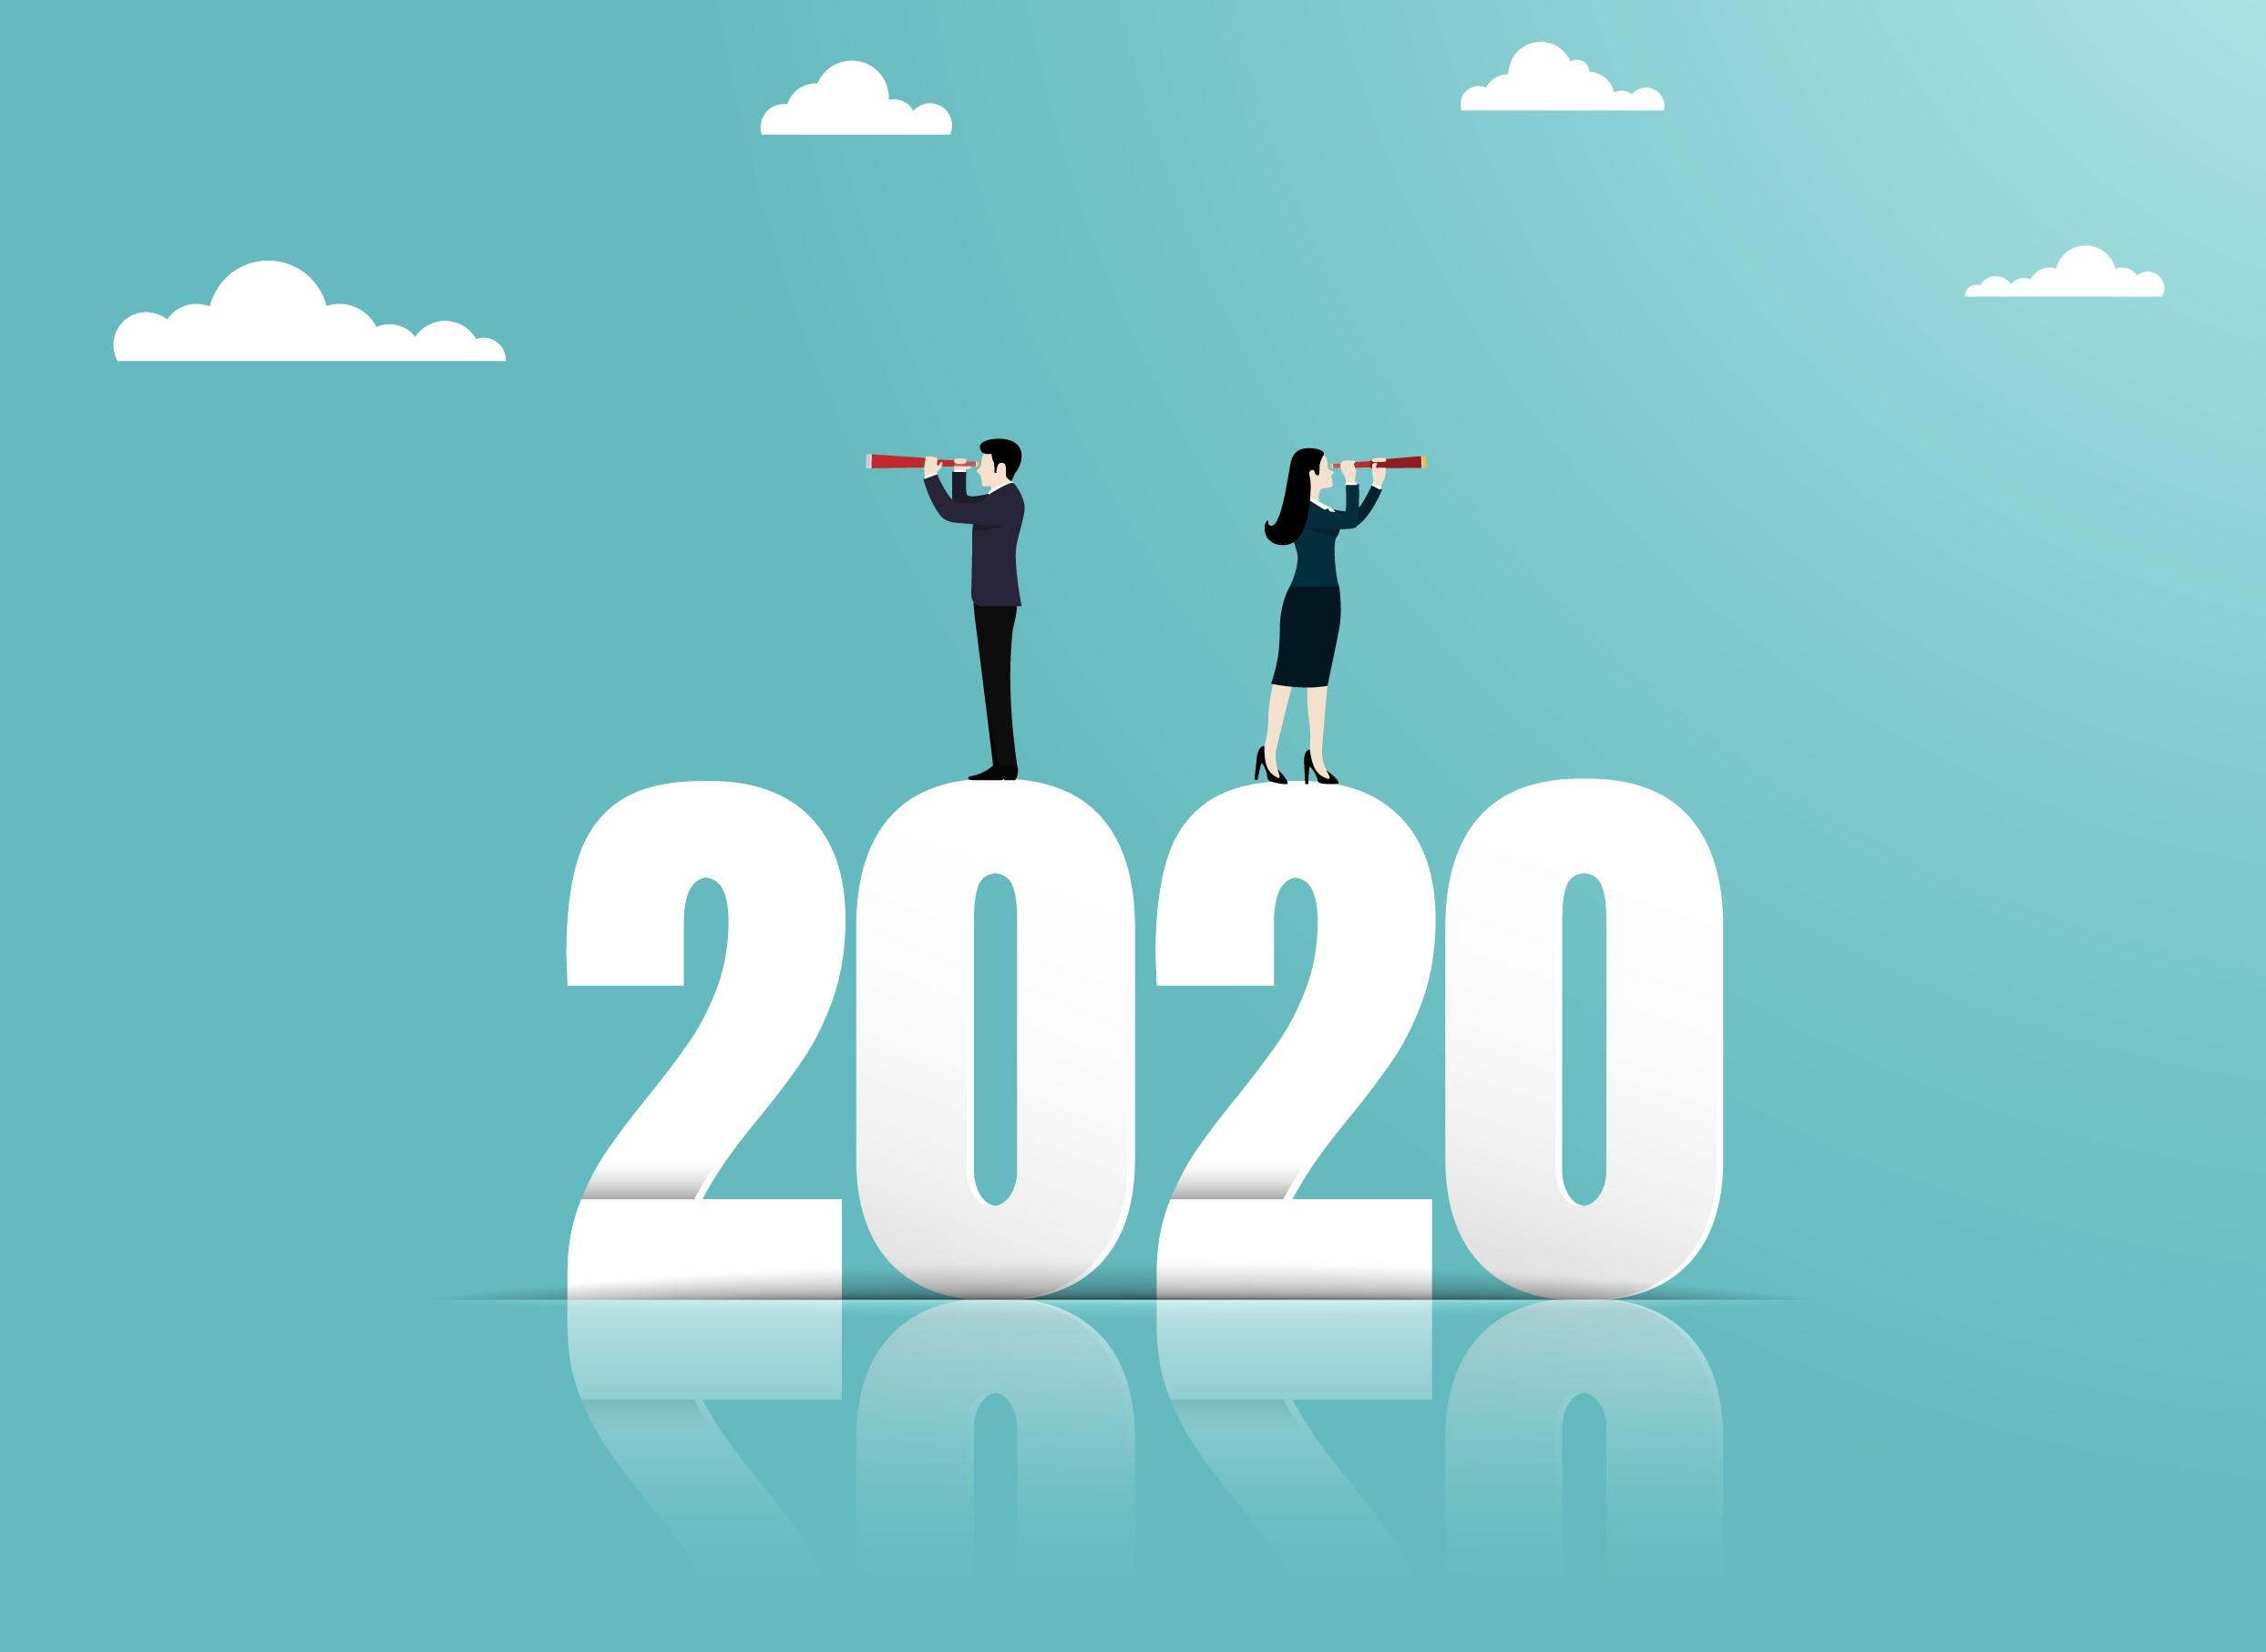 Foresight 2020: Prepare Your Business For What's Next